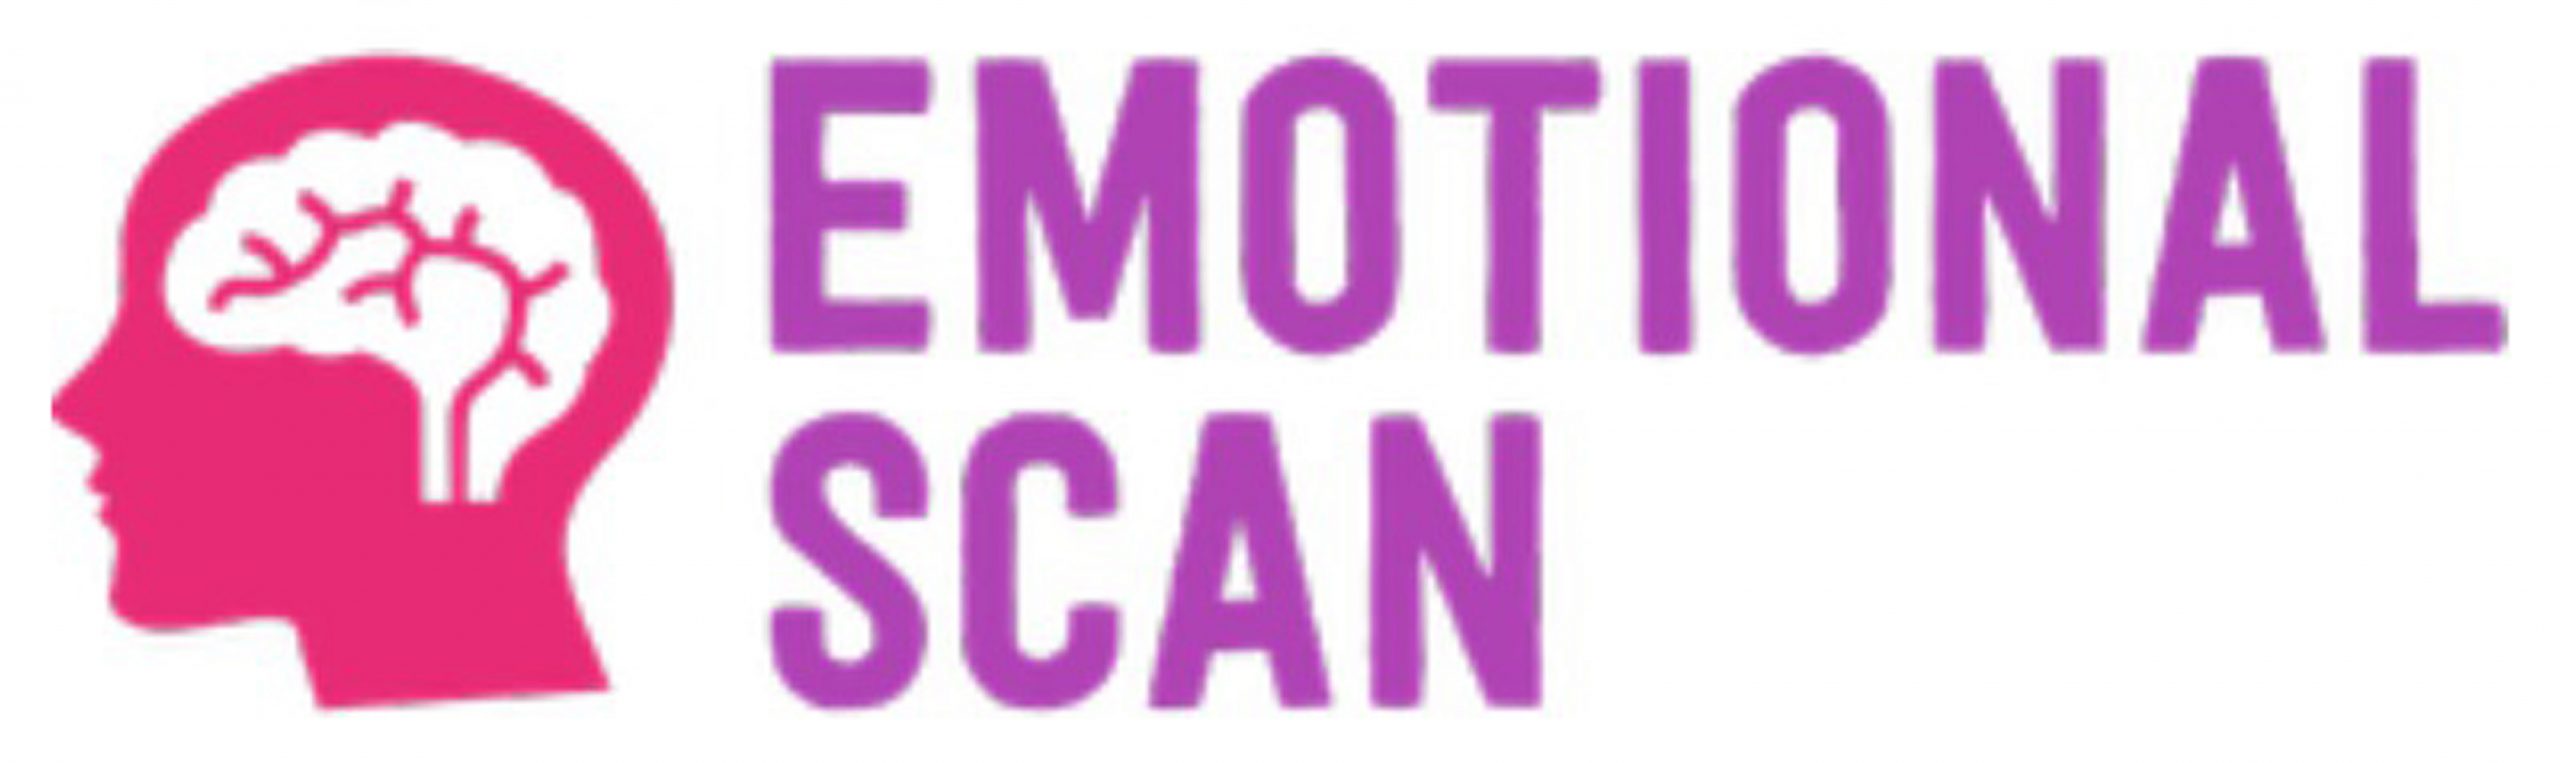 Have you ever seen your emotions? - Emotional Scan